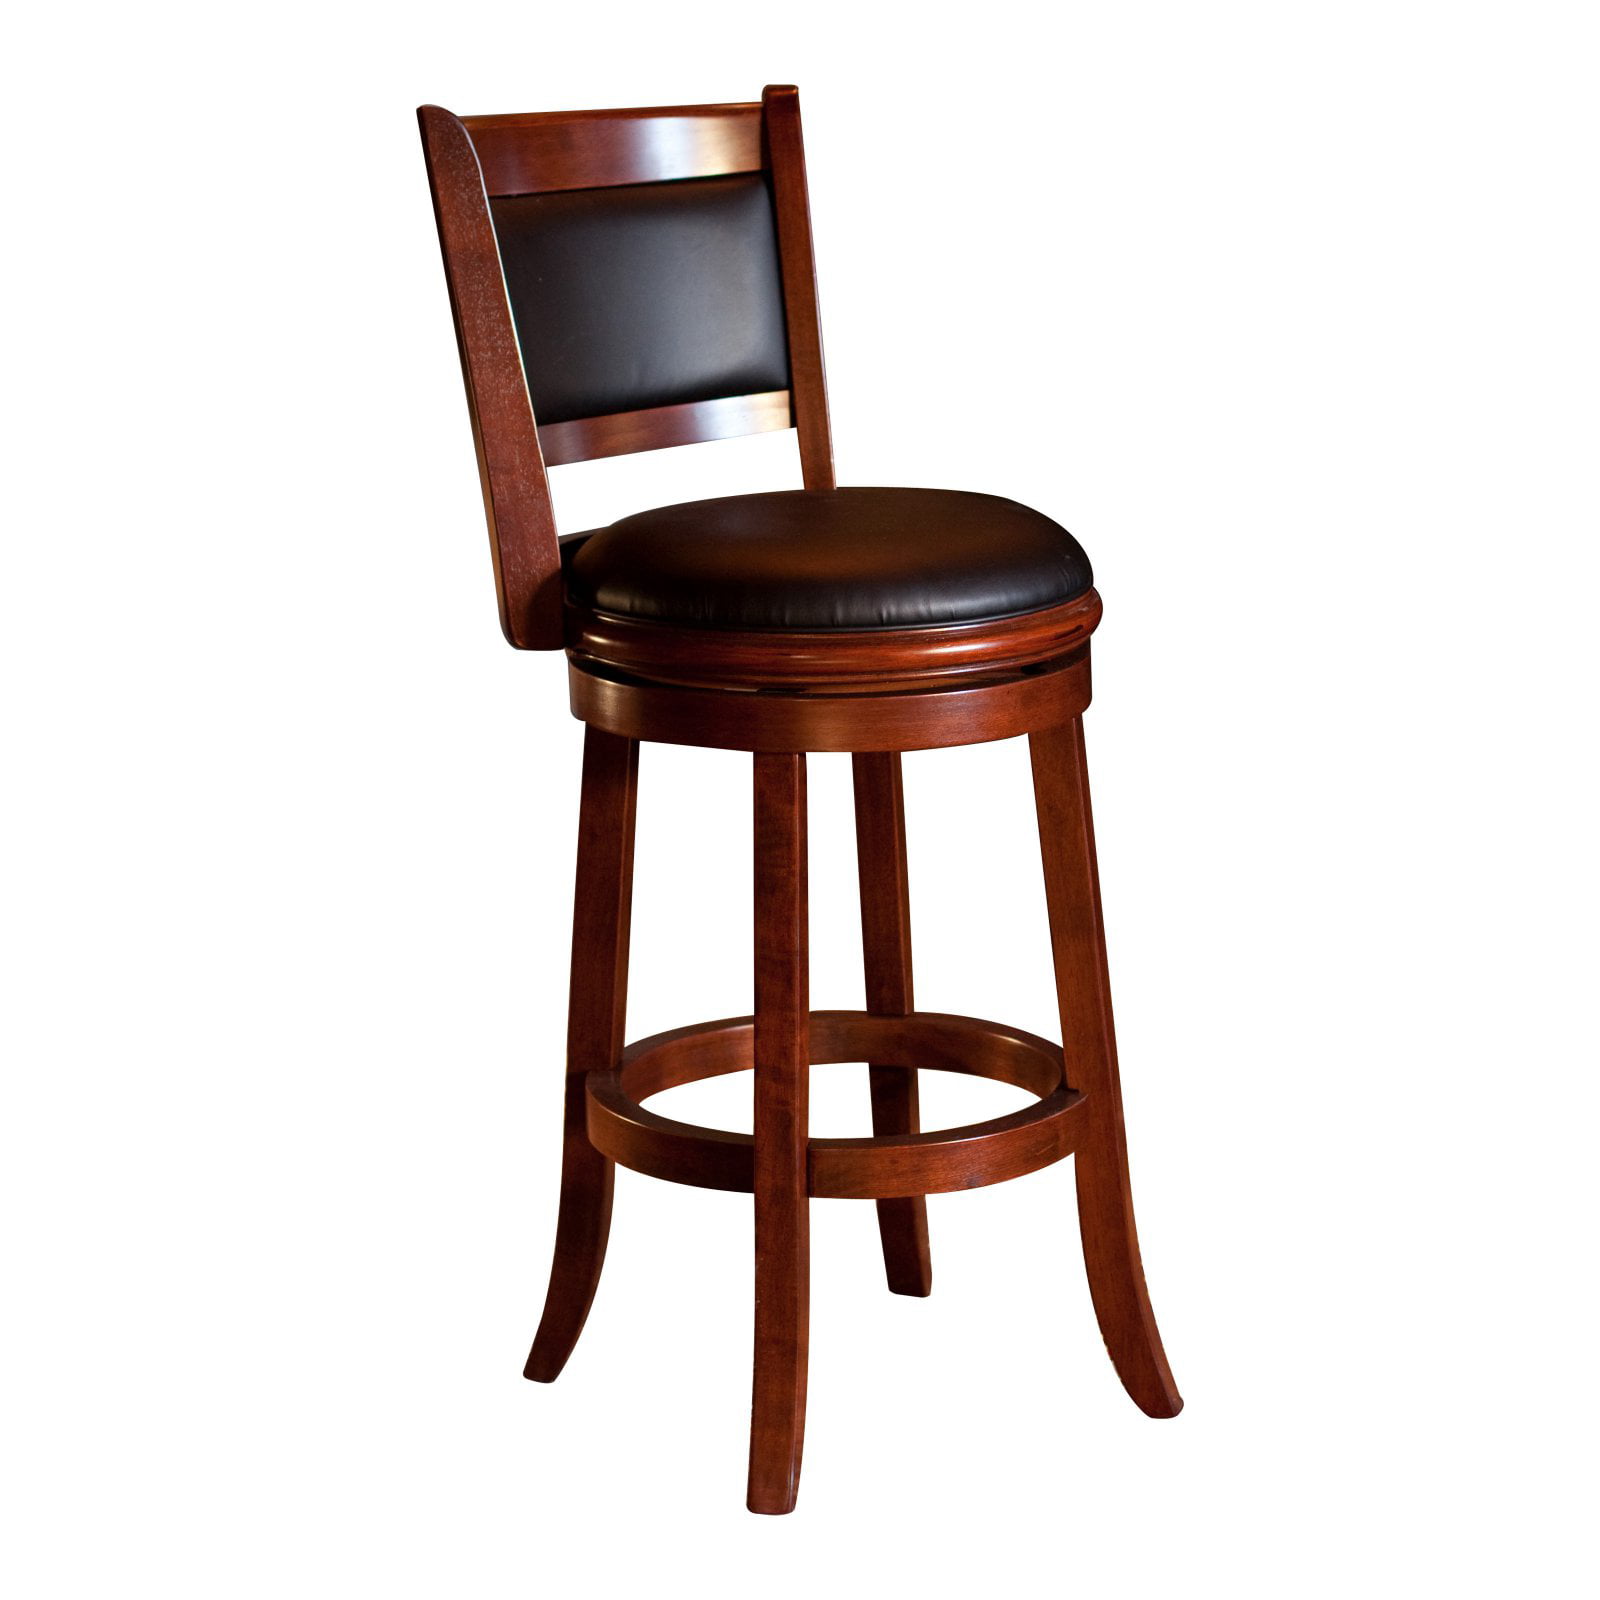 Boraam Augusta 29 Swivel Bar Stool Multiple Finishes Walmart throughout Amazing and Interesting counter stools san jose with regard to Current Home